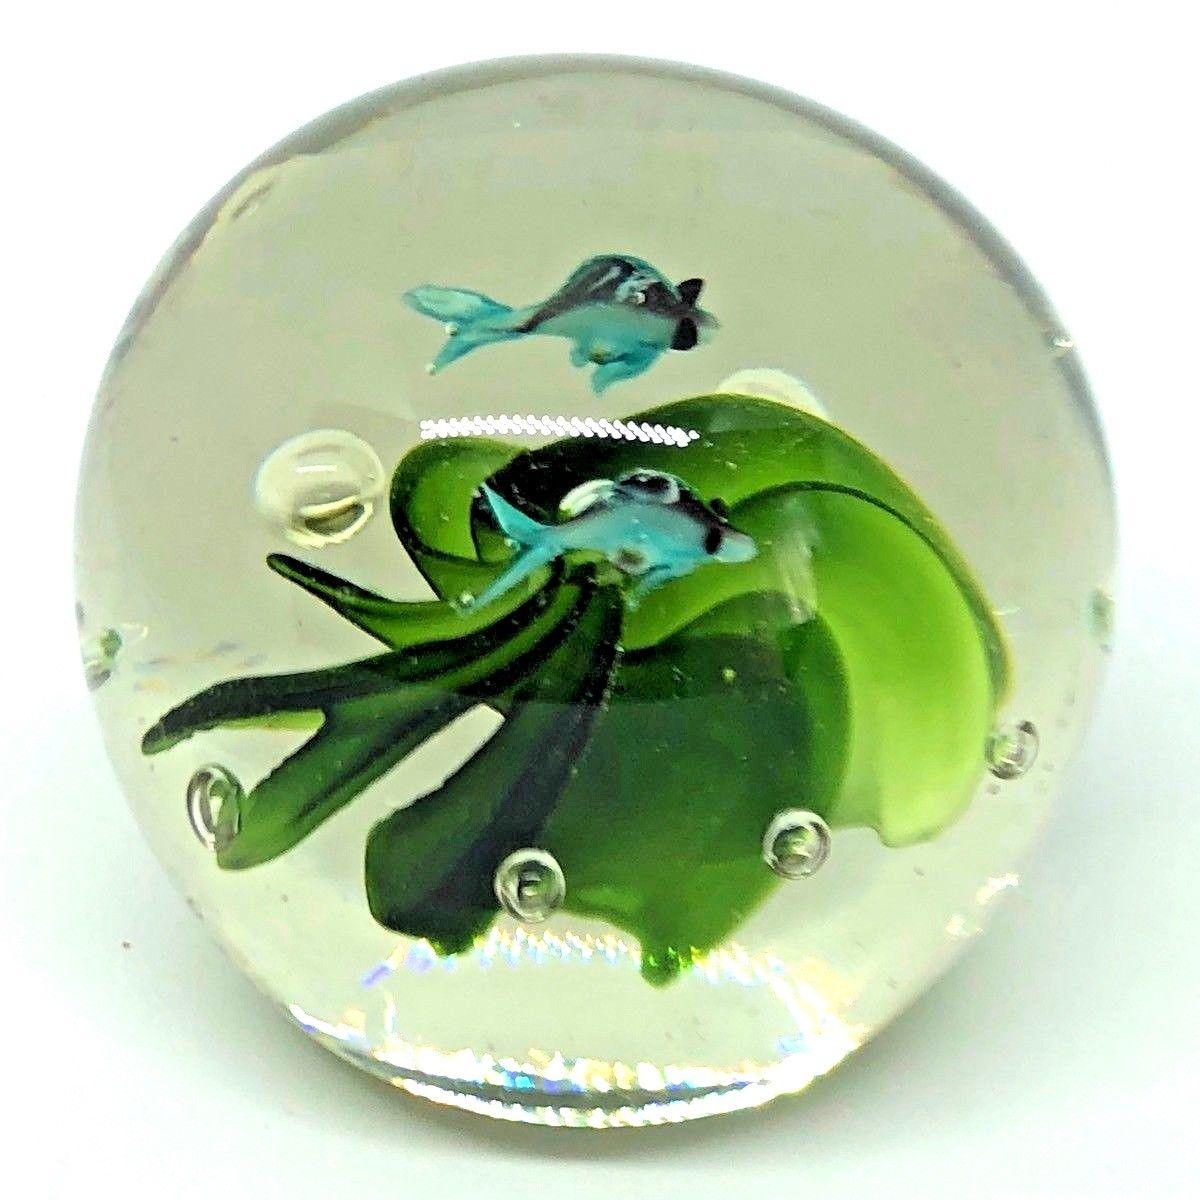 Beautiful Murano hand blown aquarium design Italian art glass paper weight. Showing two fish inside, in different colors, floating on controlled bubbles. Colors are a dark green, light green, blue, black and white. A beautiful nice addition to your